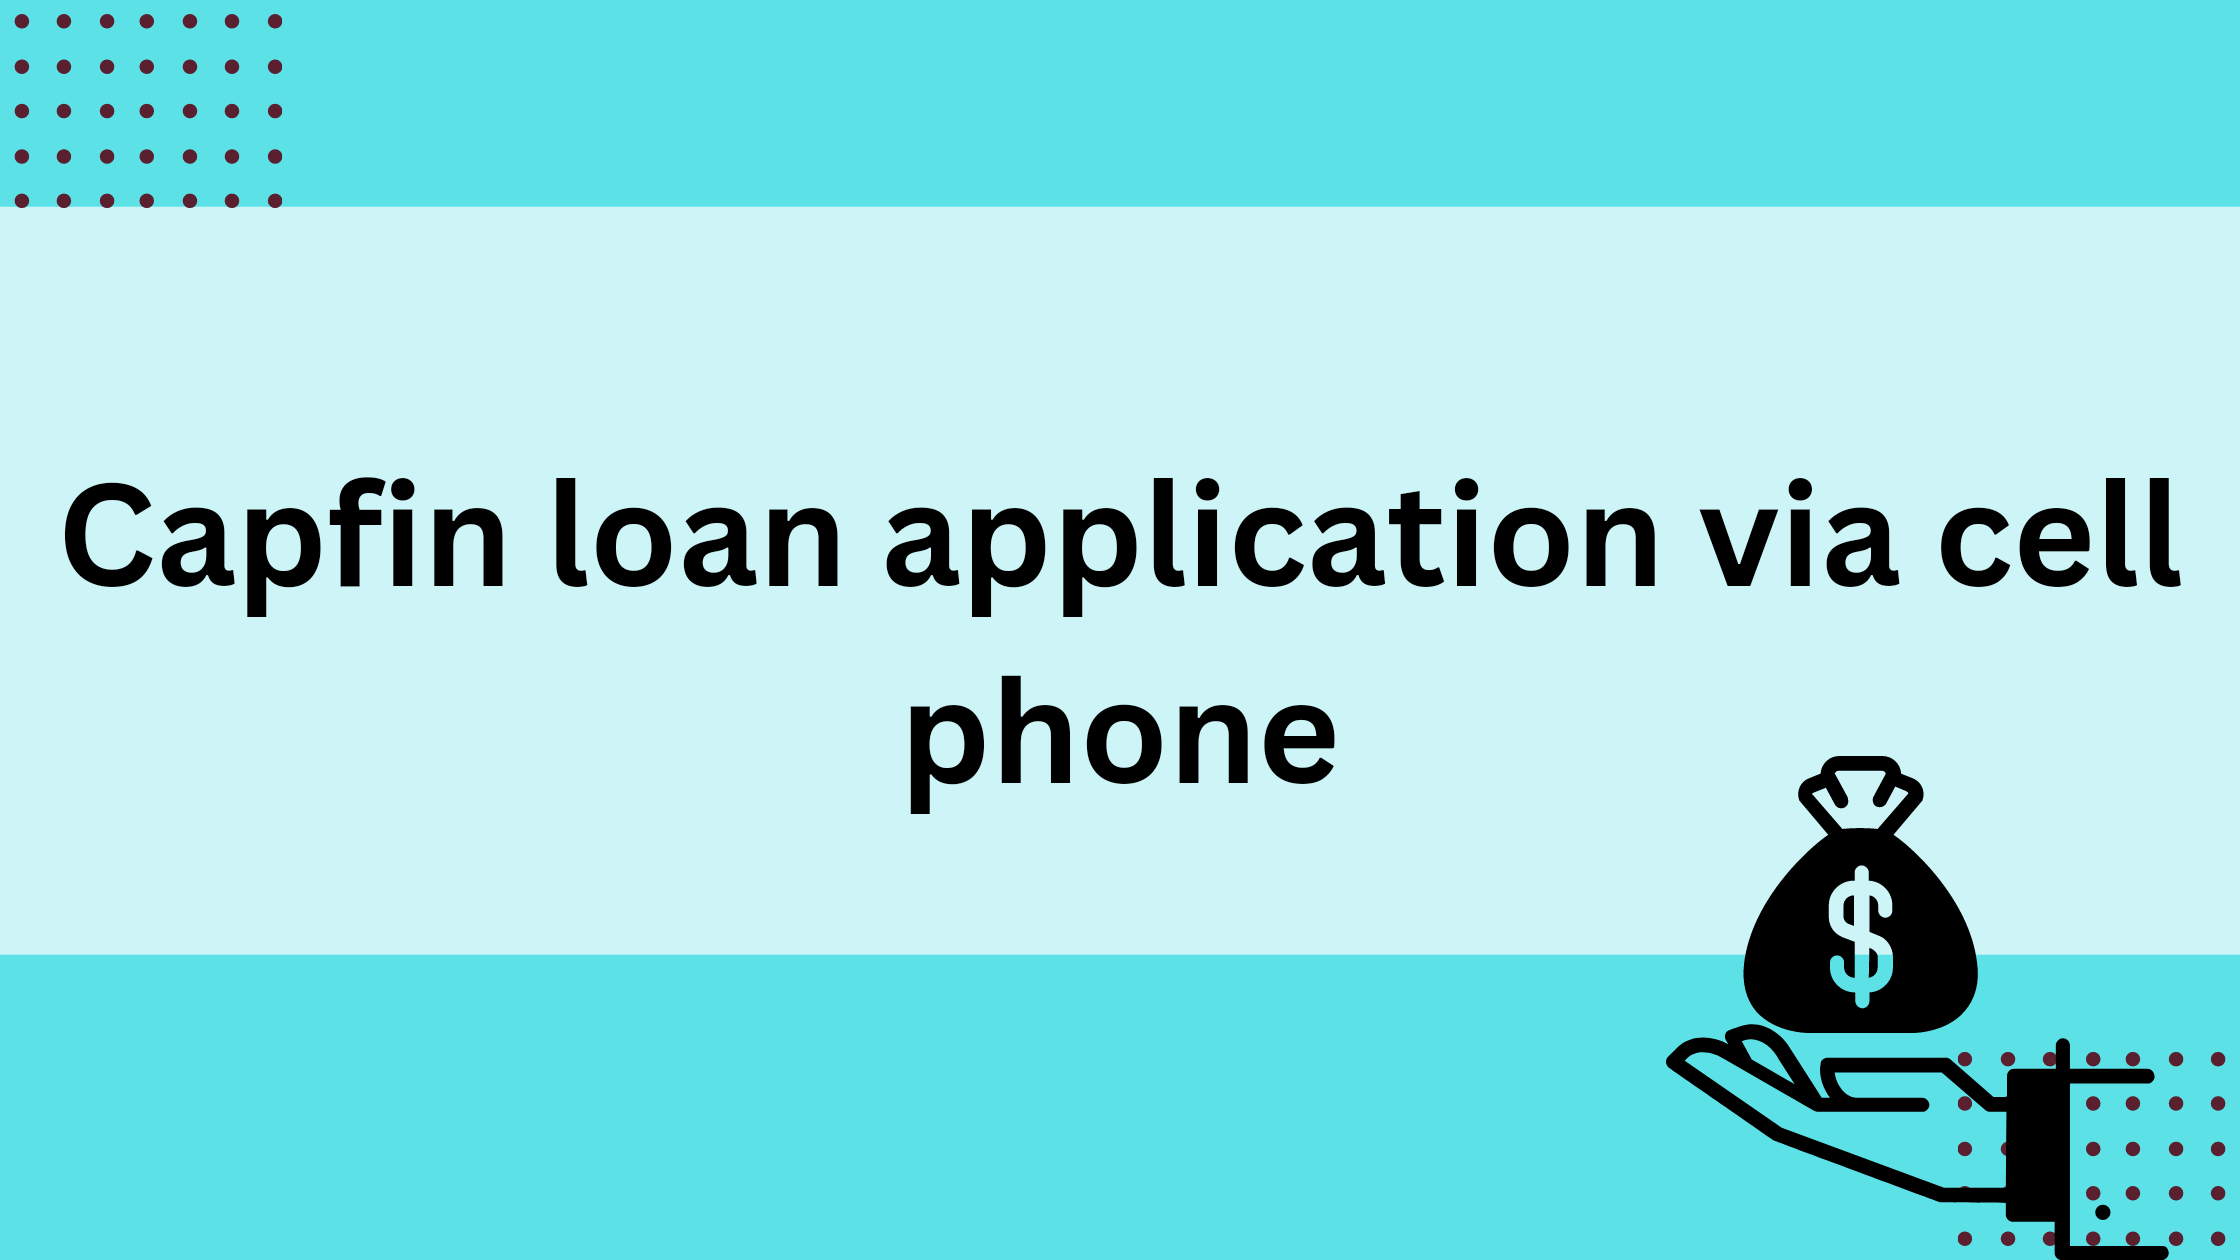 Capfin loan application via cell phone - South Africa Ask